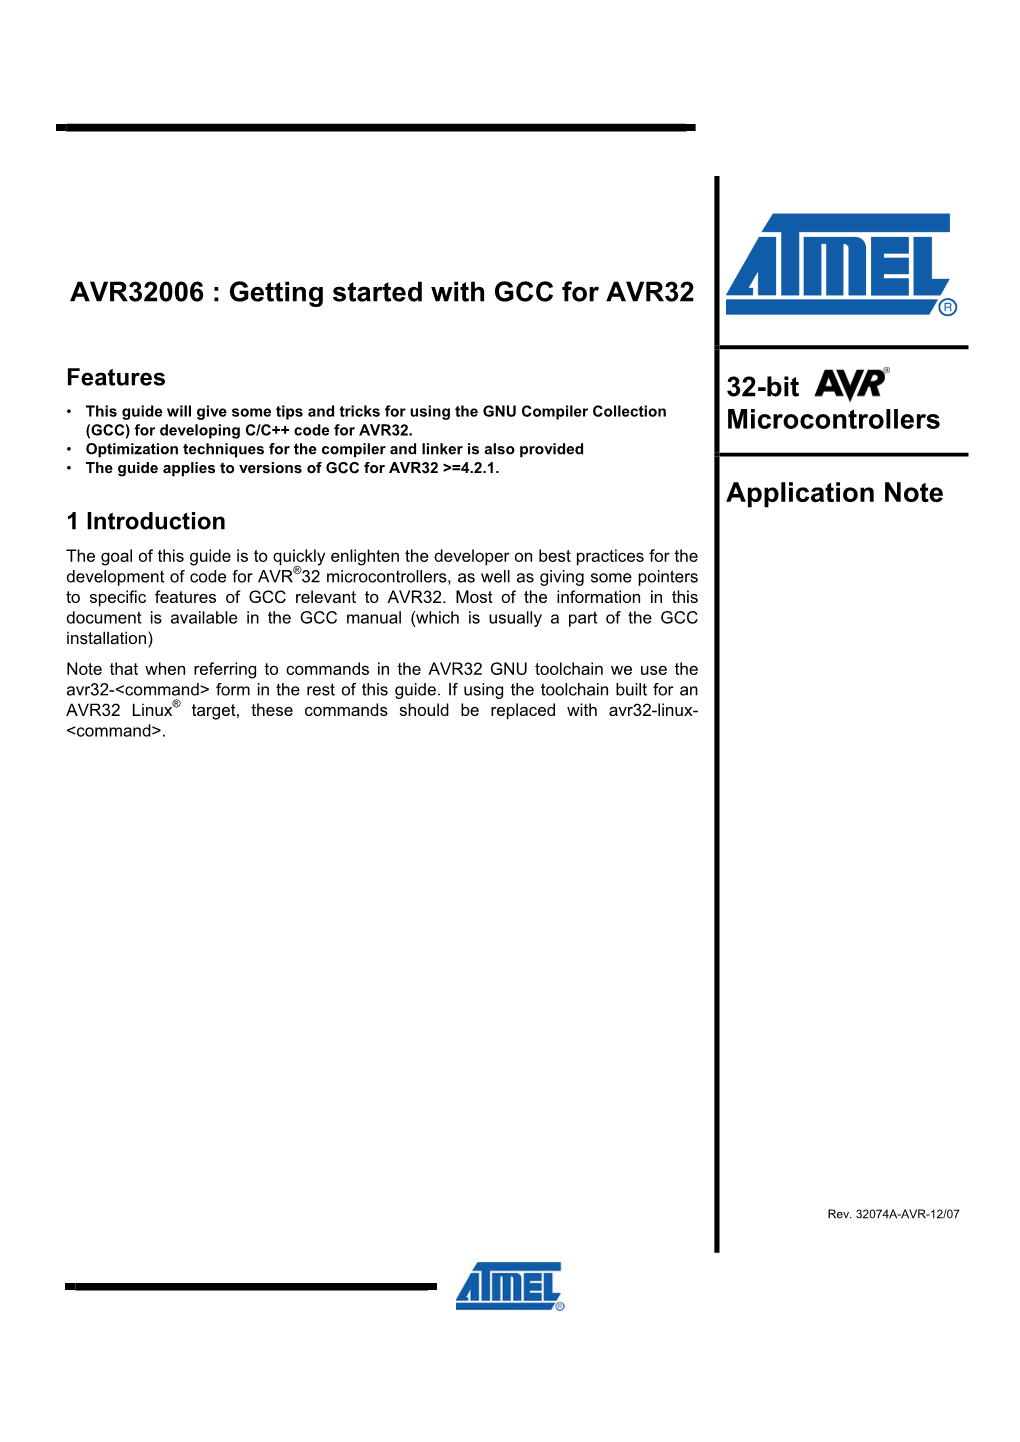 AVR32074 : Getting Started with GCC for AVR32